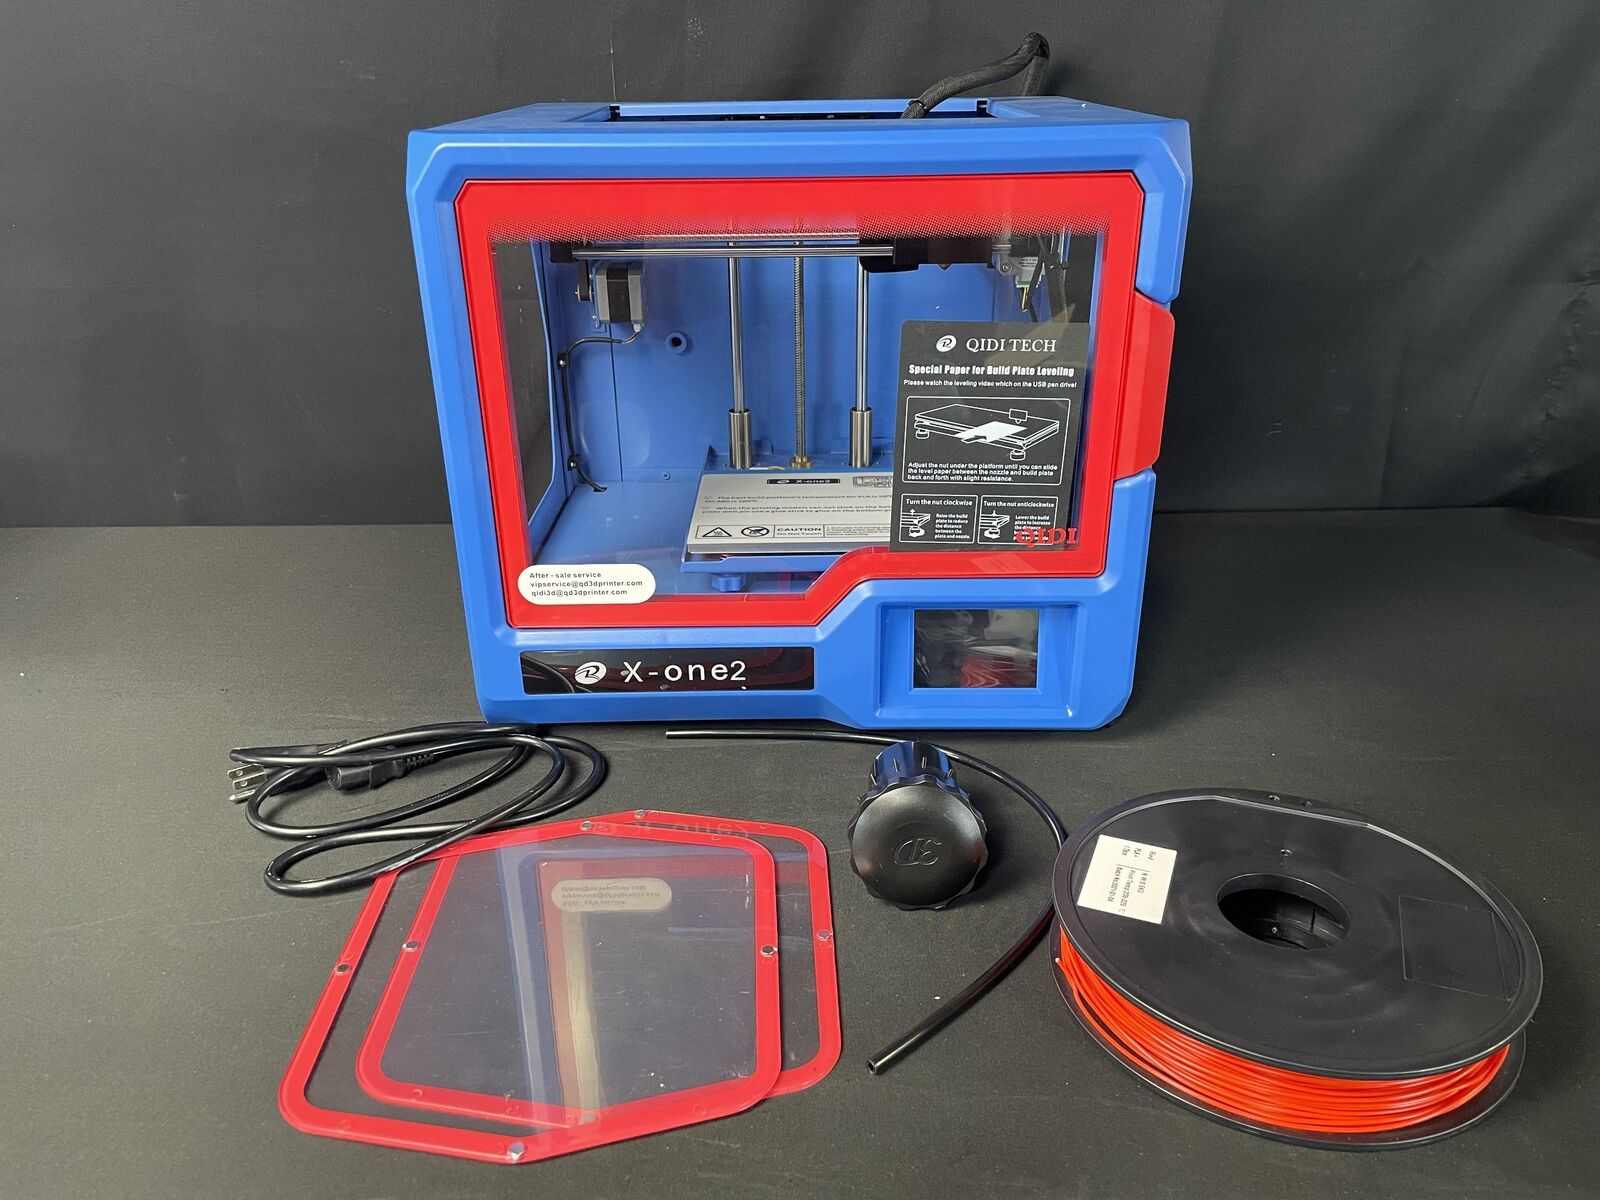 Qidi Technology X-One2 3D Printer in Blue Used Please Read